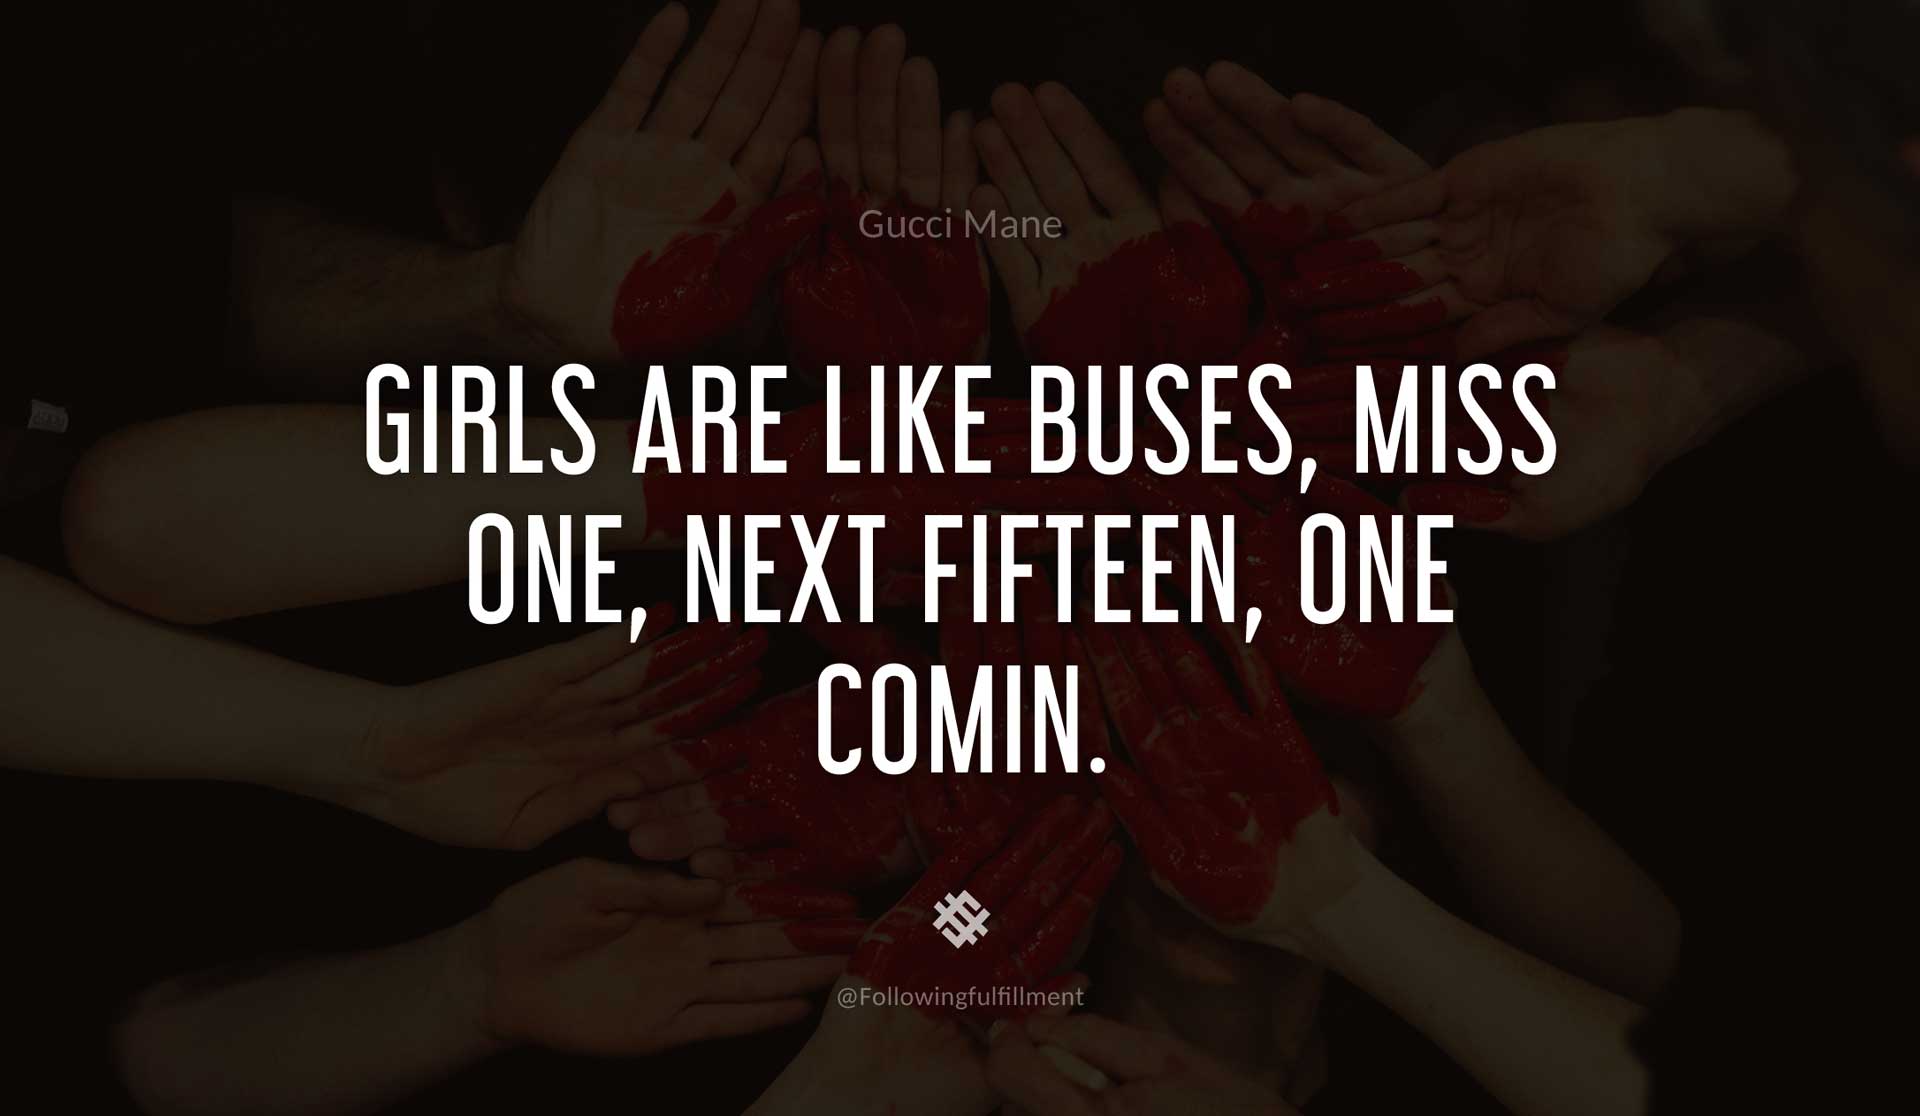 Girls-are-like-buses,-miss-one,-next-fifteen,-one-comin.-GUCCI-MANE-Quote.jpg